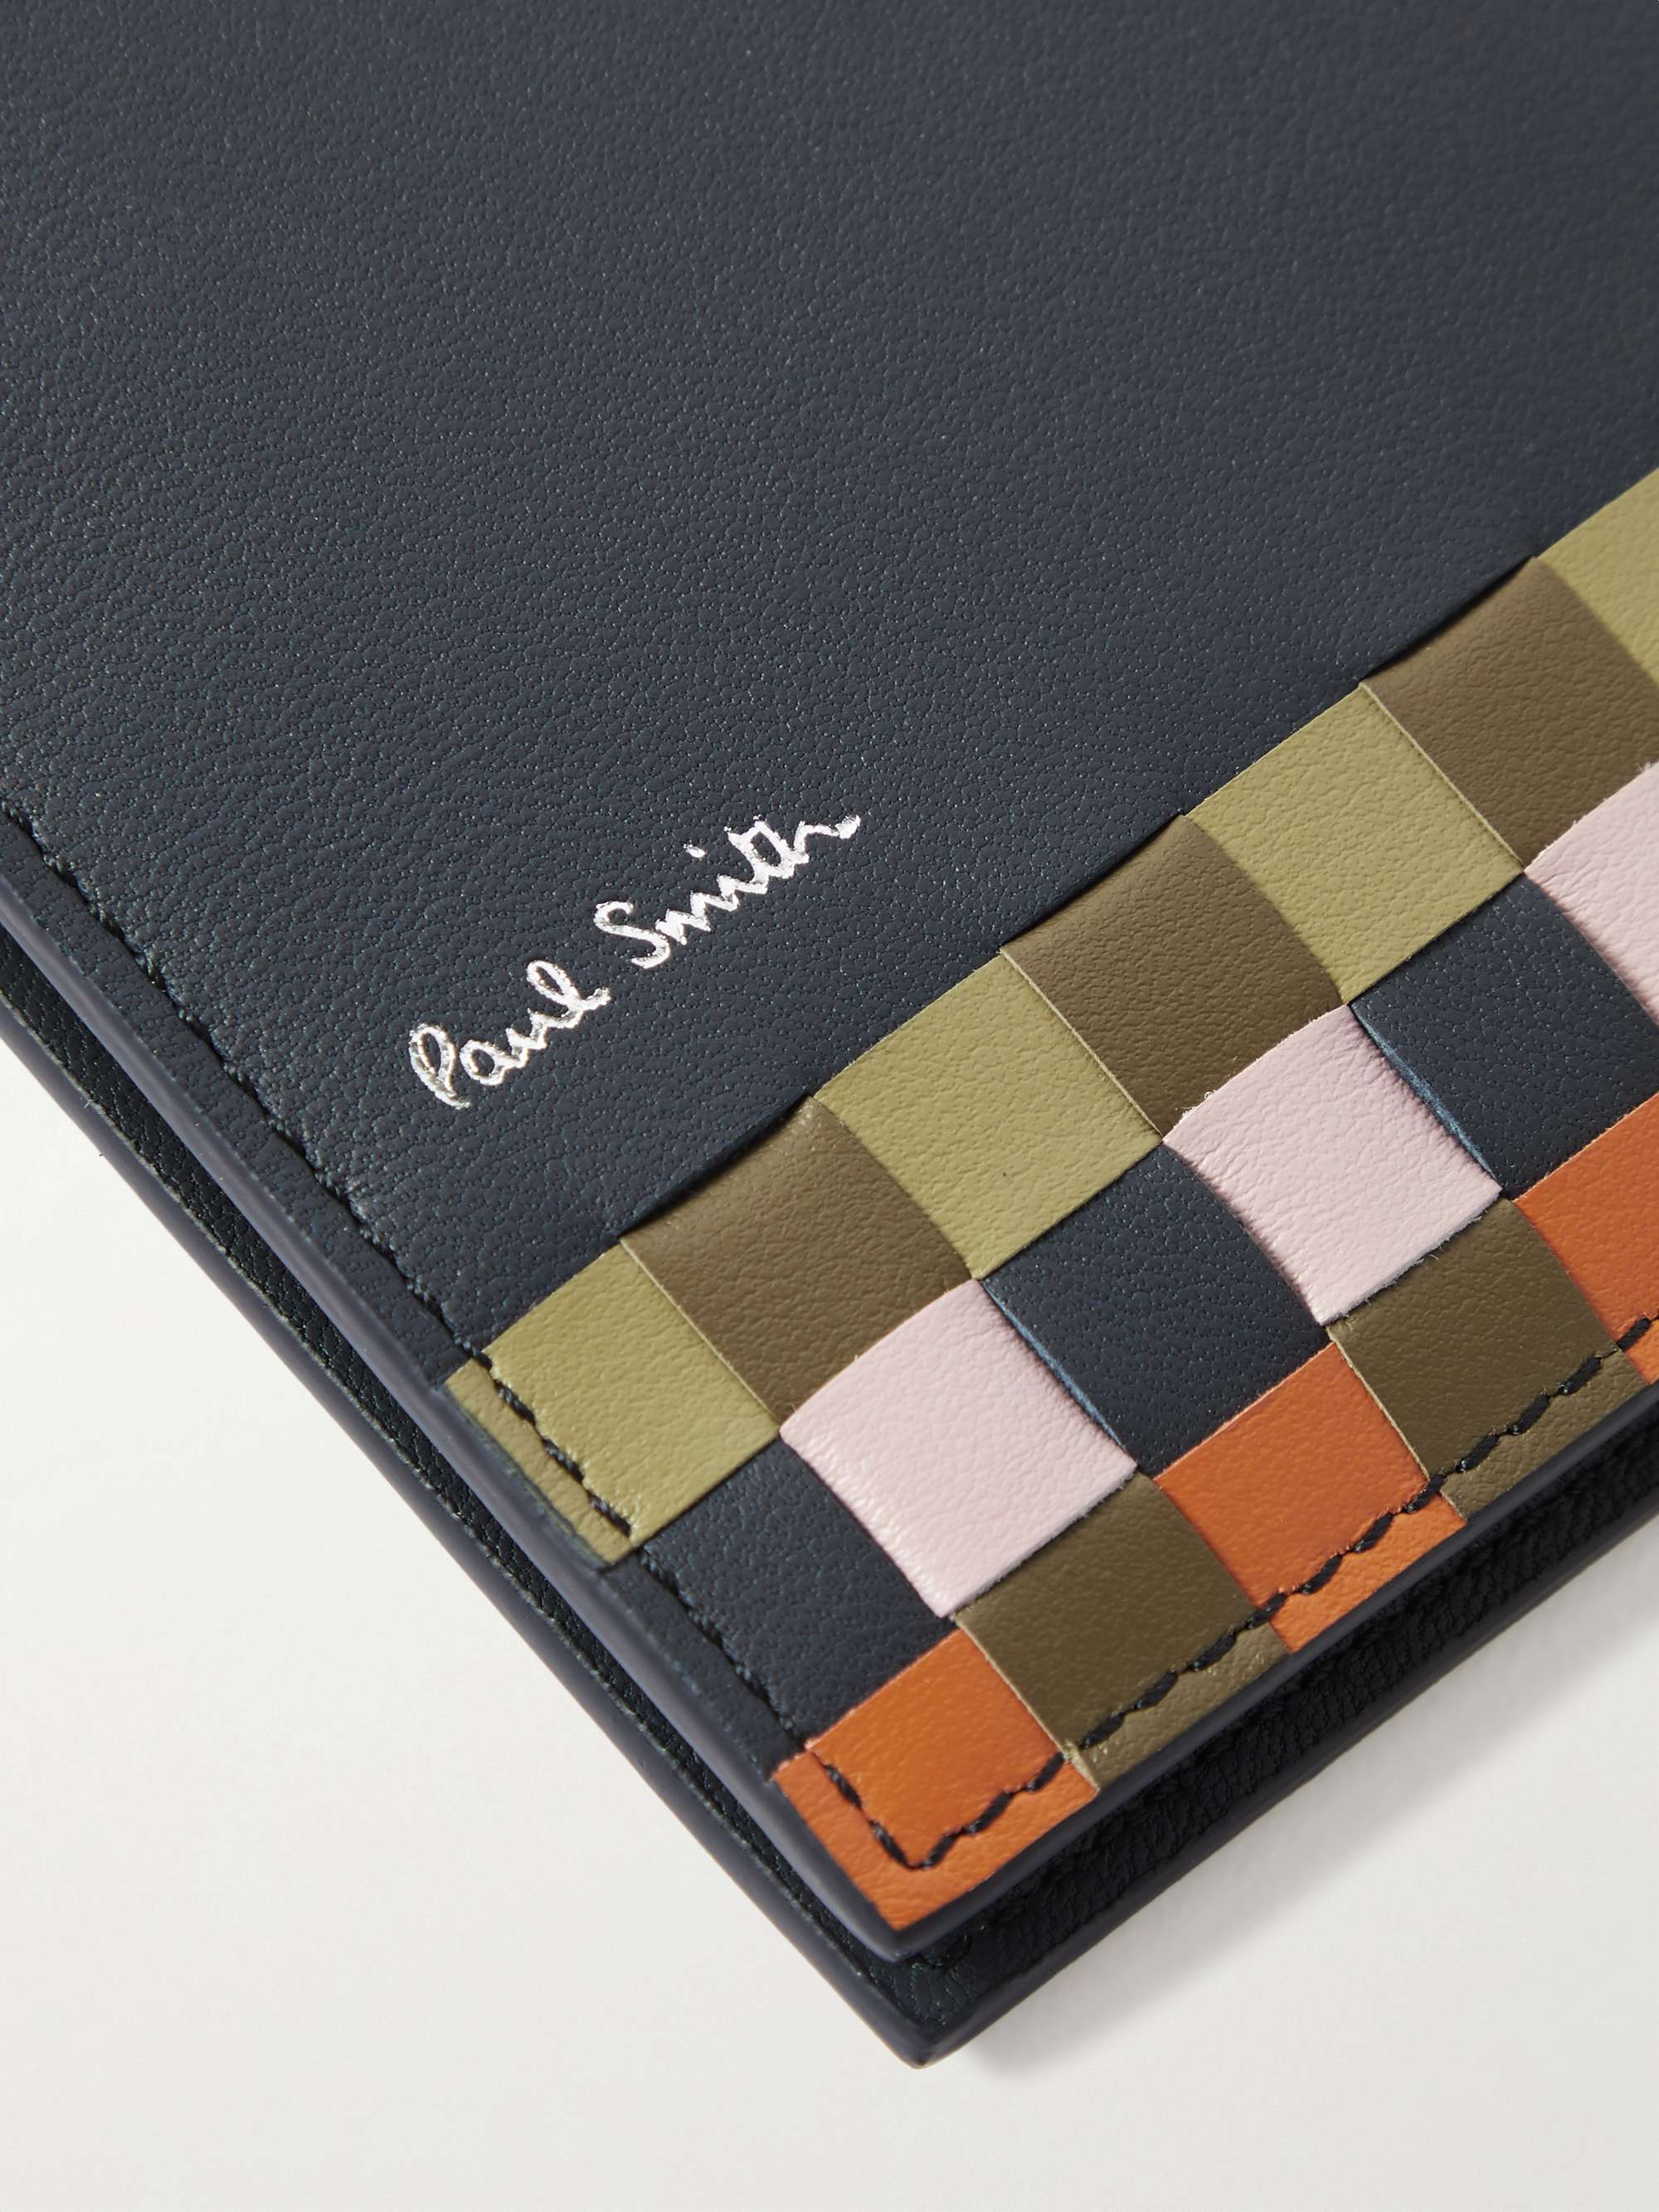 PAUL SMITH Checked Leather Billfold Wallet | MR PORTER